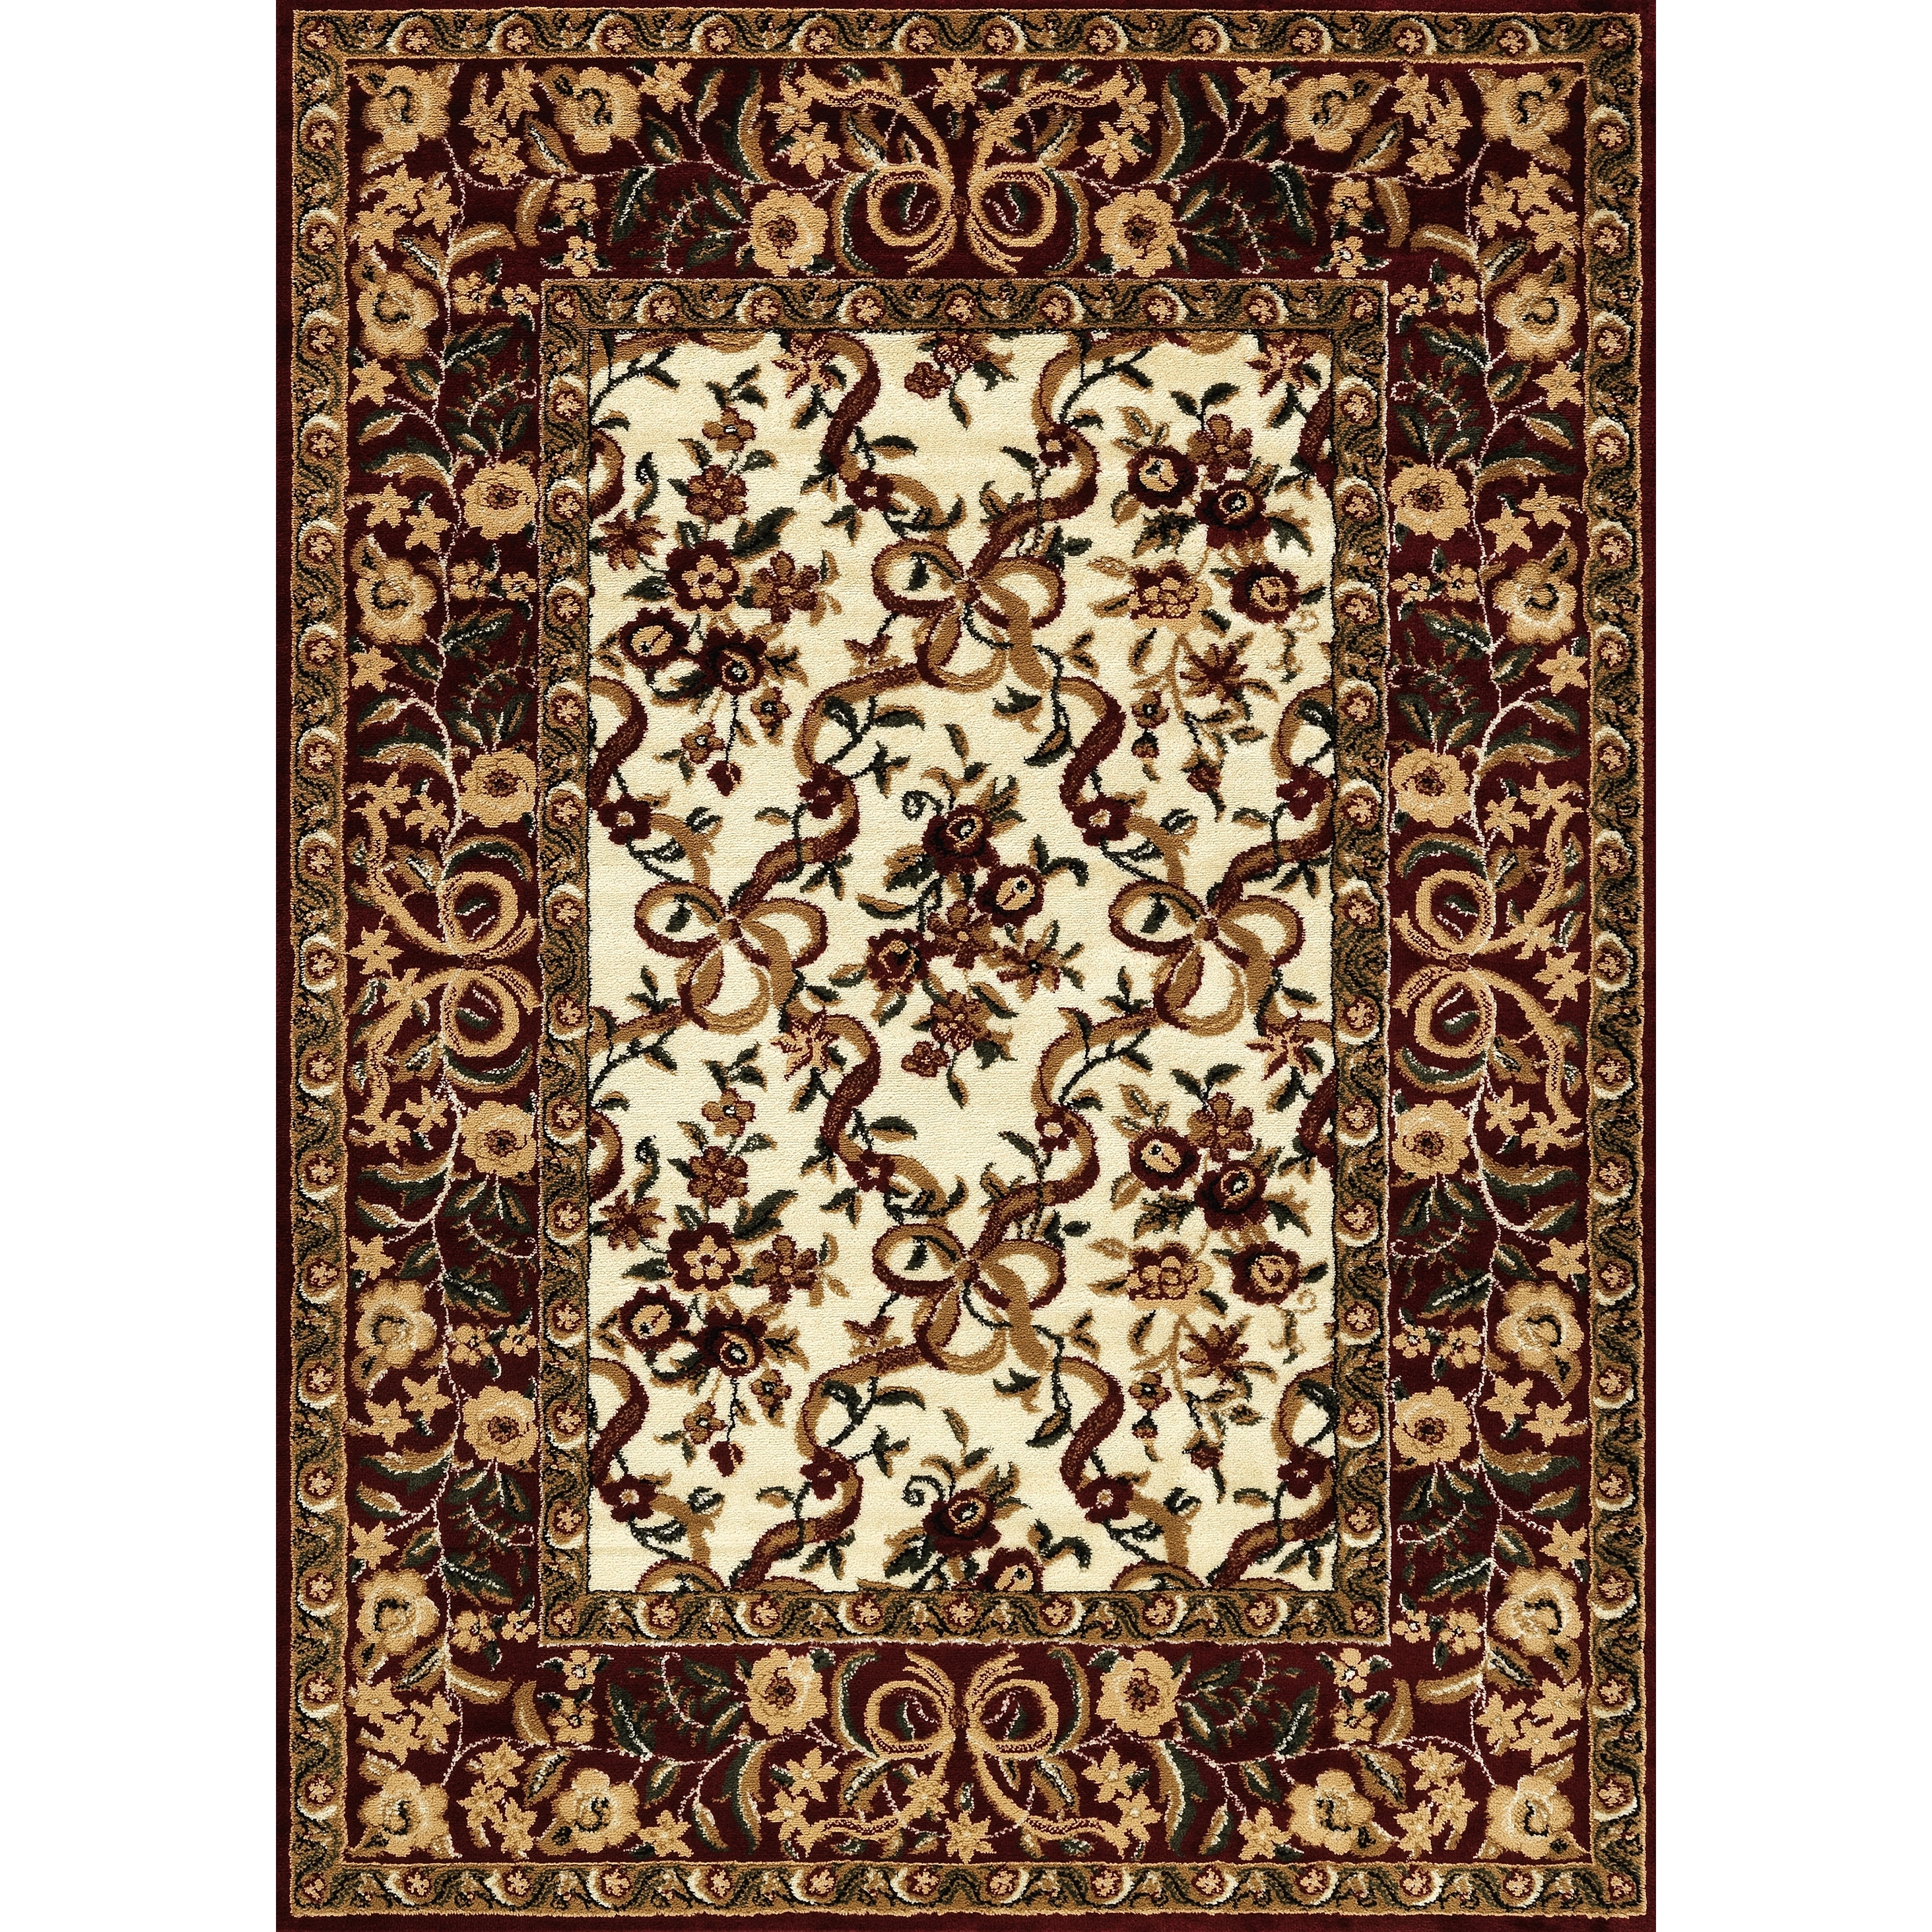 Floral Ivory Area Rug (7 10 X 10 2)